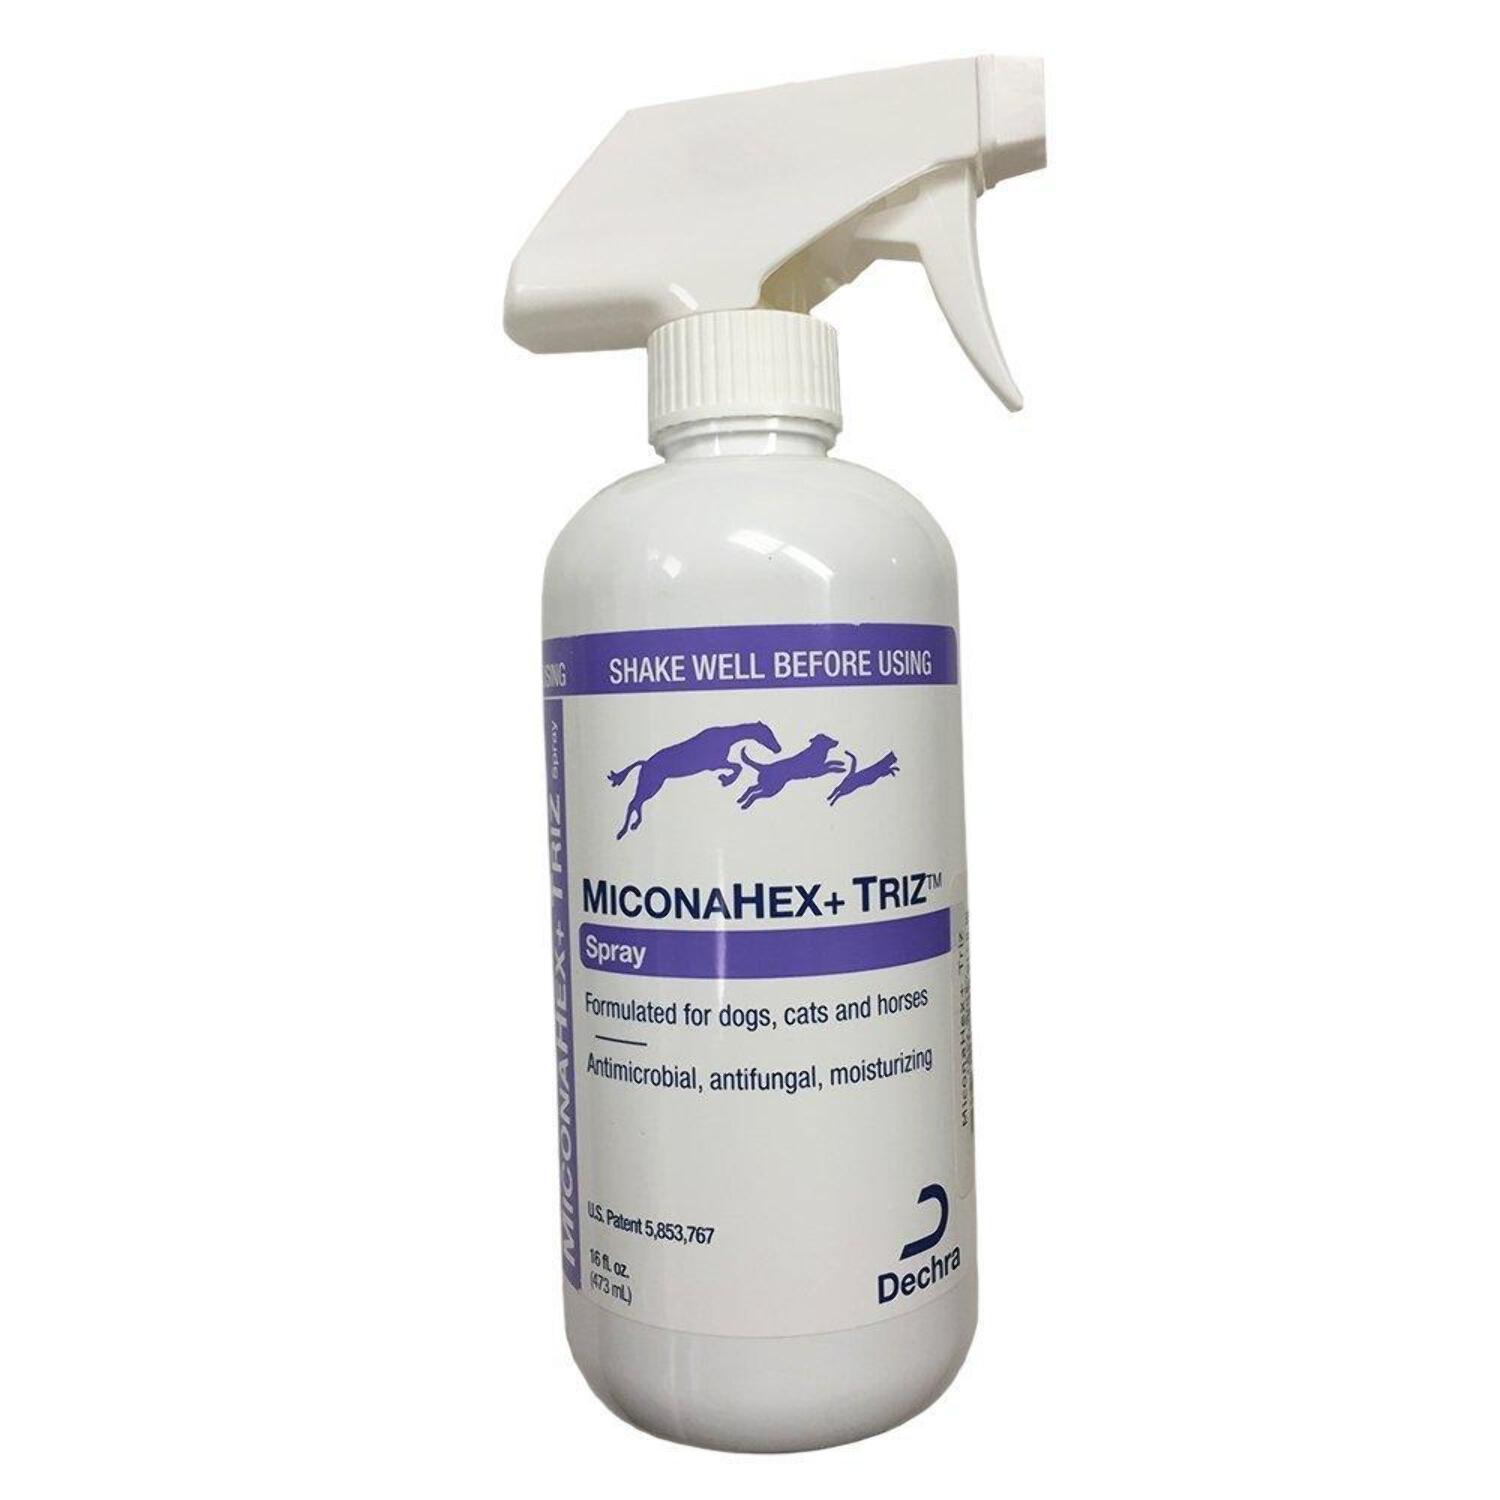 MiconaHex+Triz Spray Skin Infections In Dog Cat  Horses 16 oz. - image 1 of 2